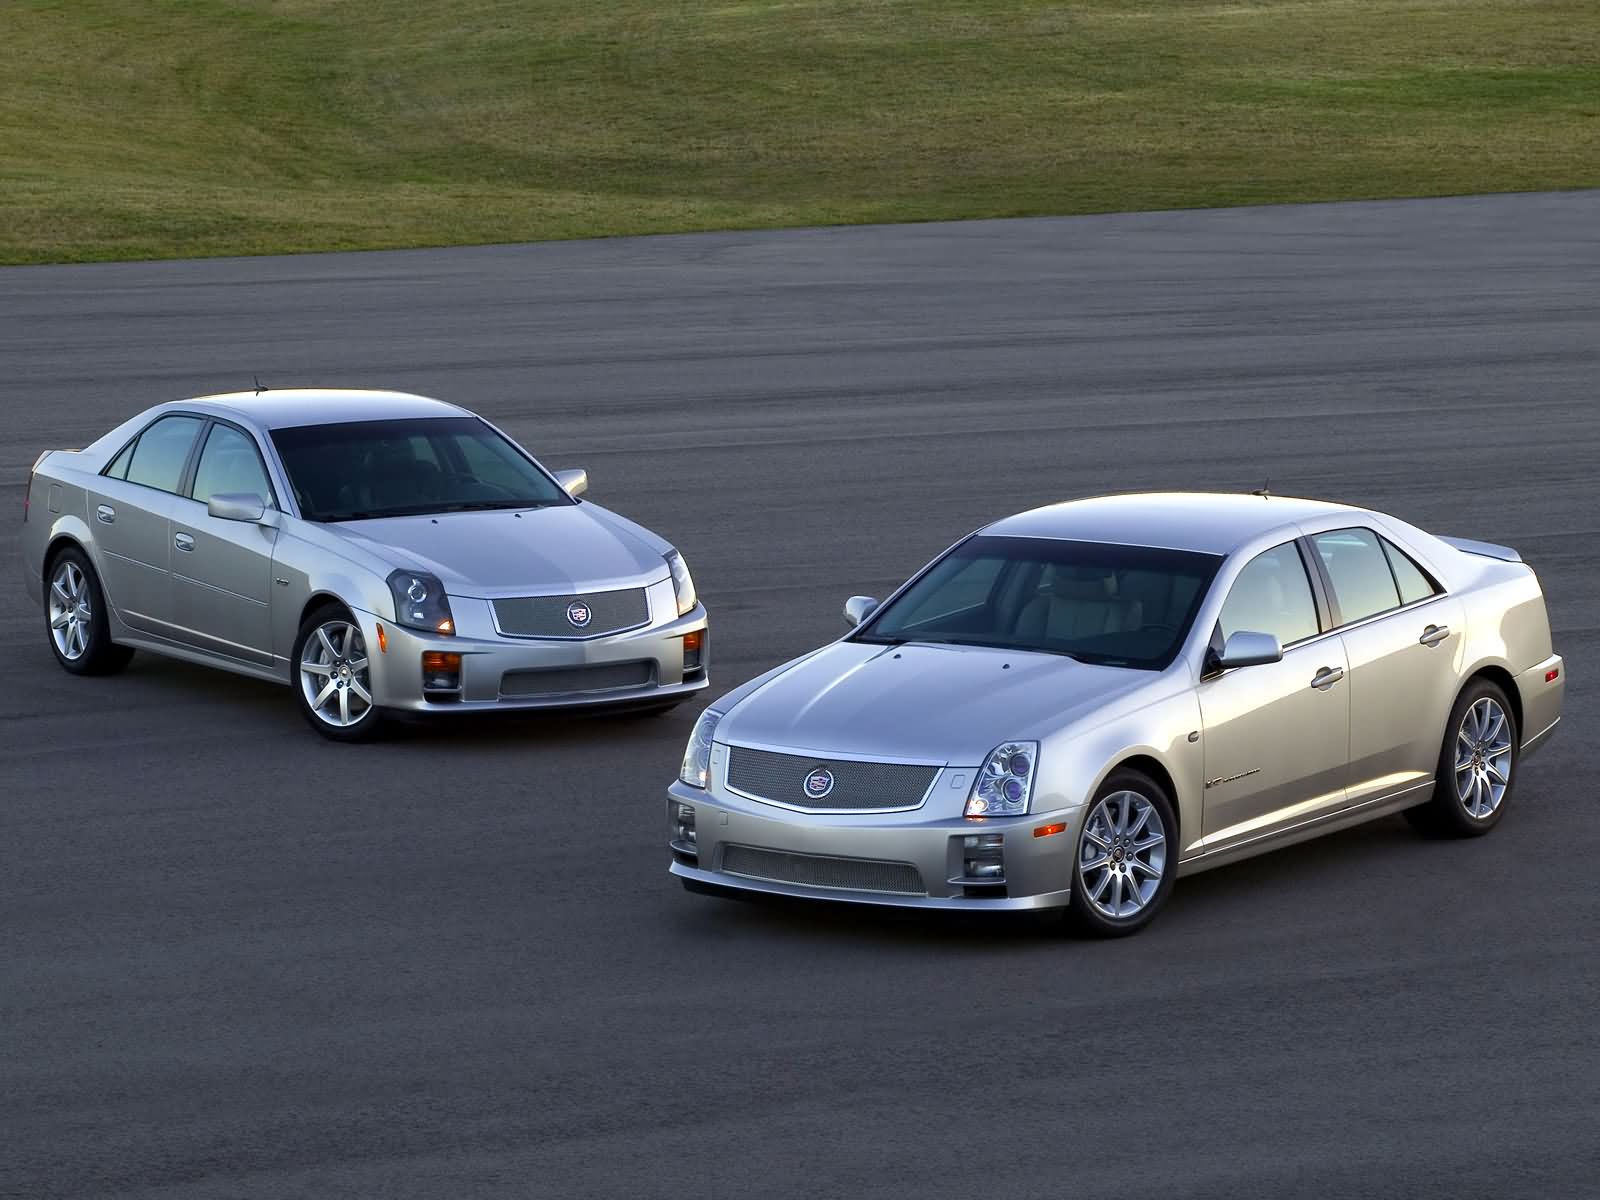 You can vote for this Cadillac STS-V photo